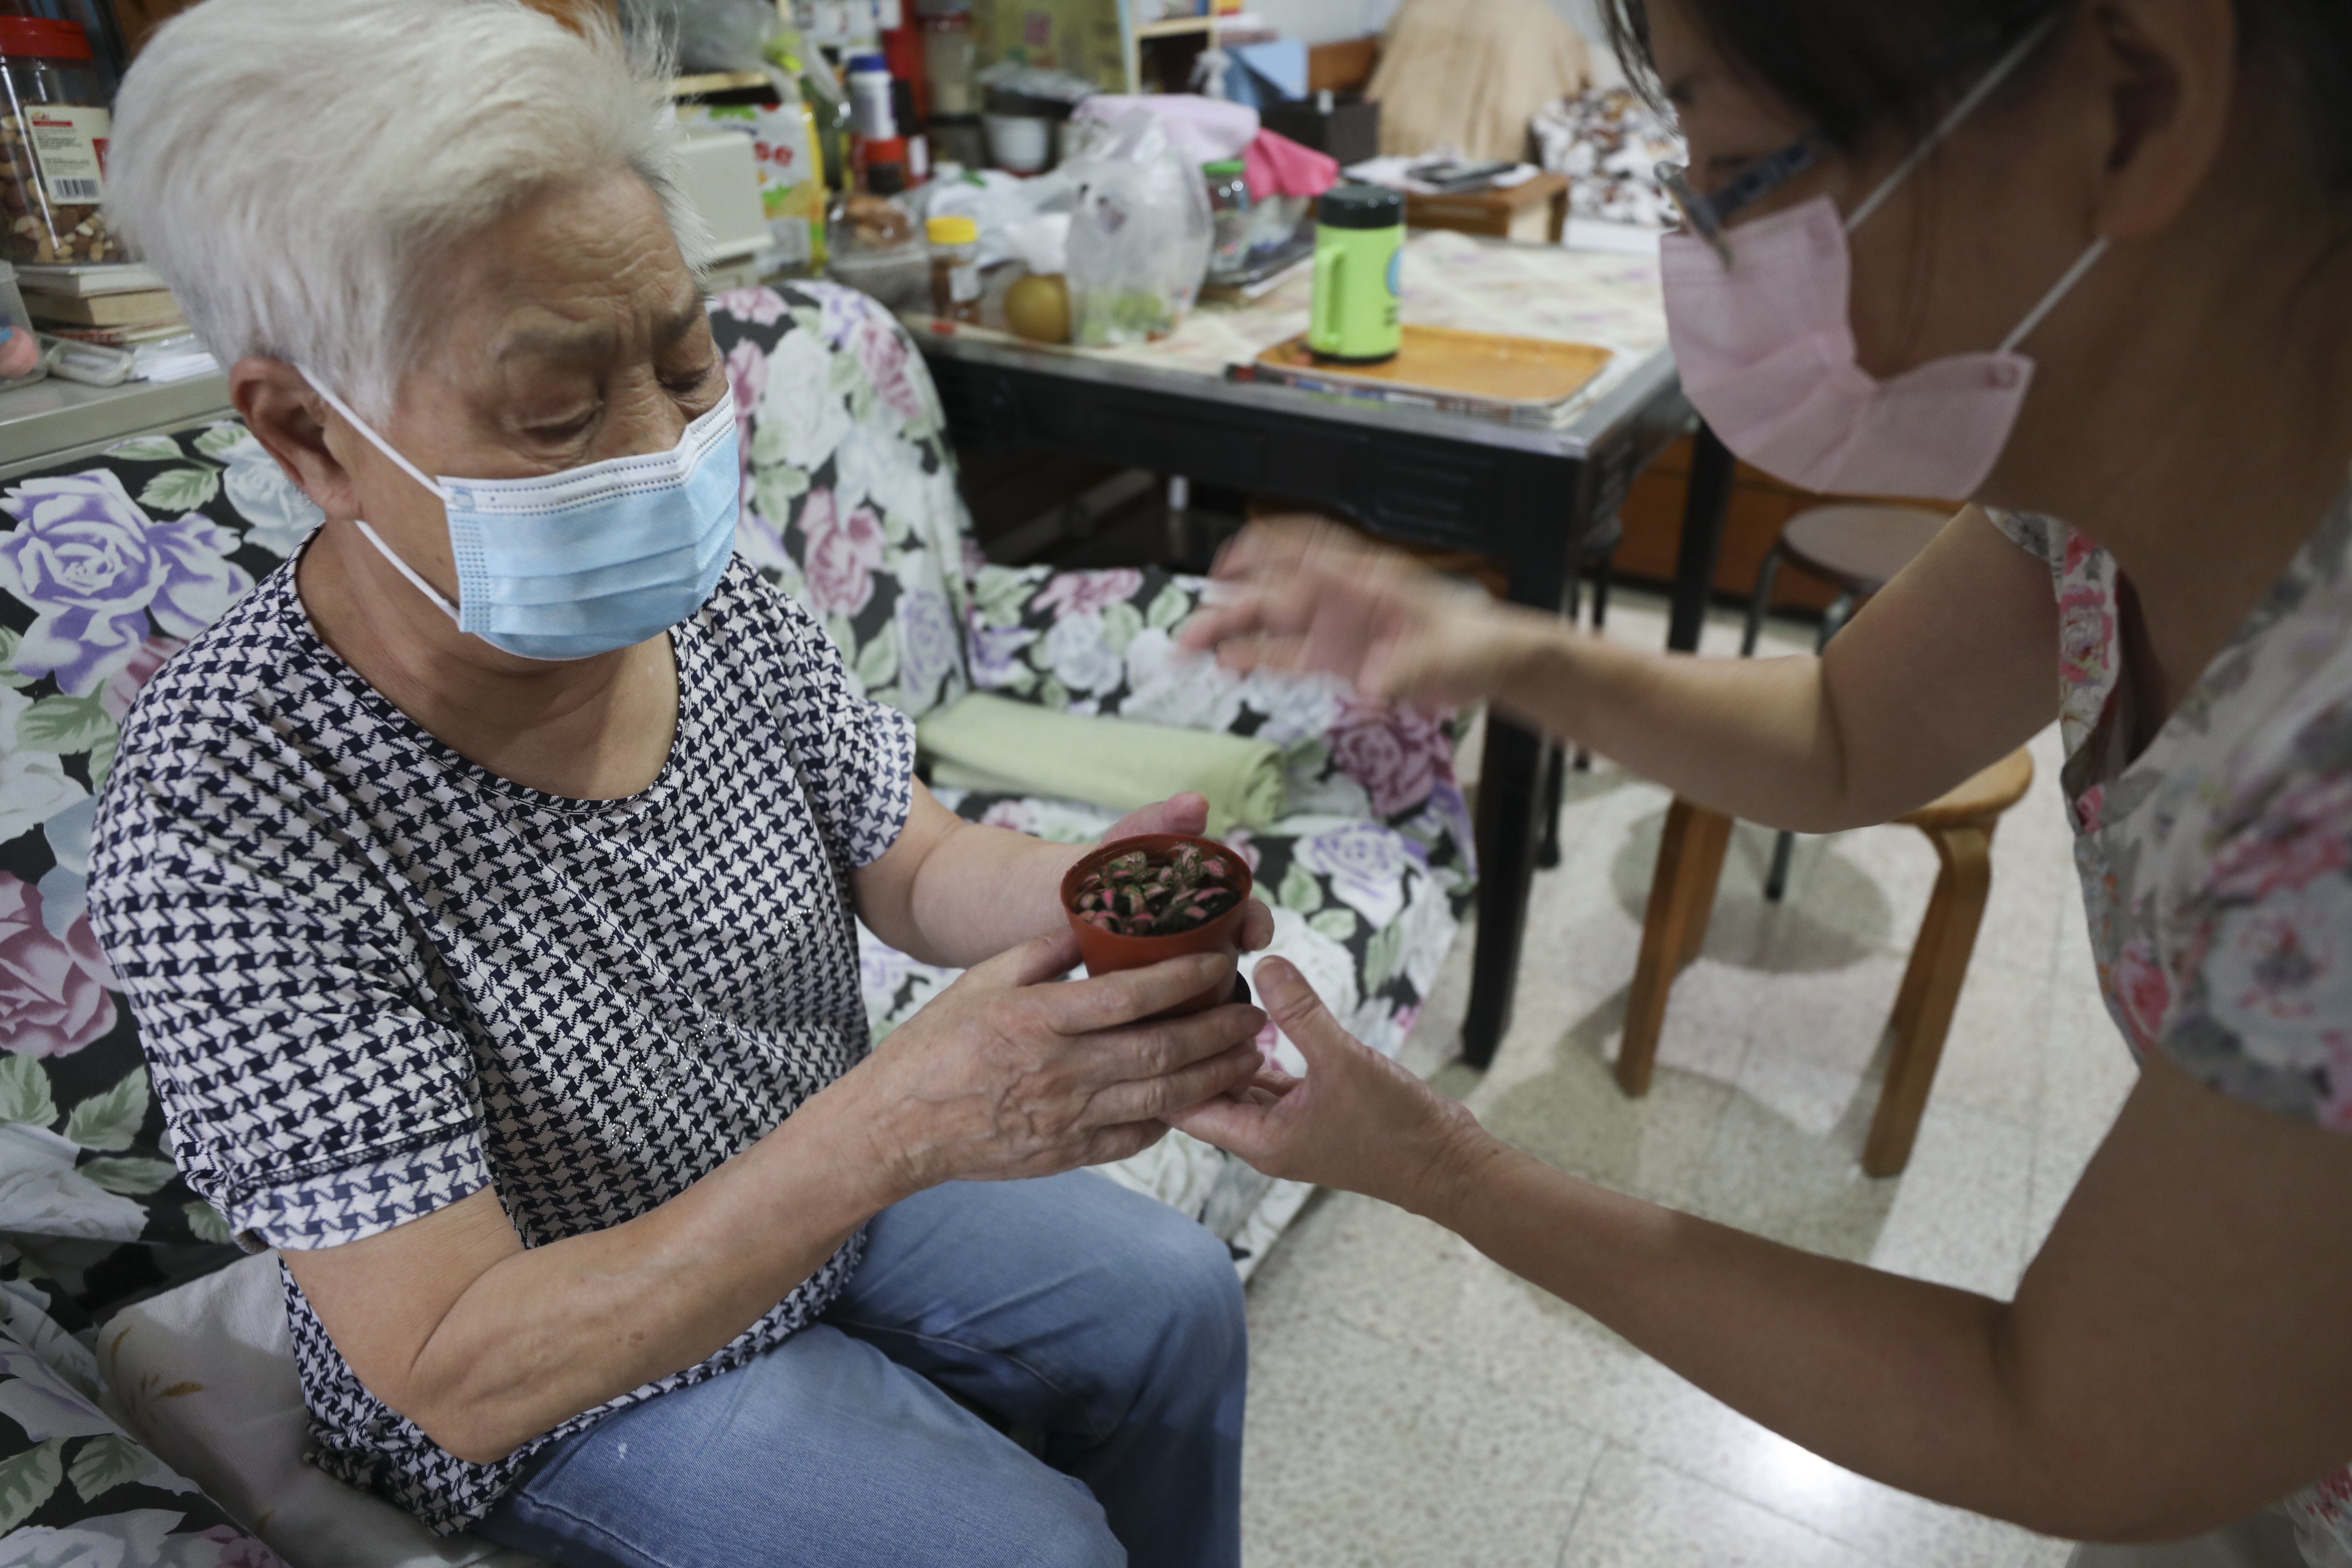 Helping out the elderly is one of the most popular volunteering opportunities in Hong Kong, a data-driven platform has found. Photo: Xiaomei Chen